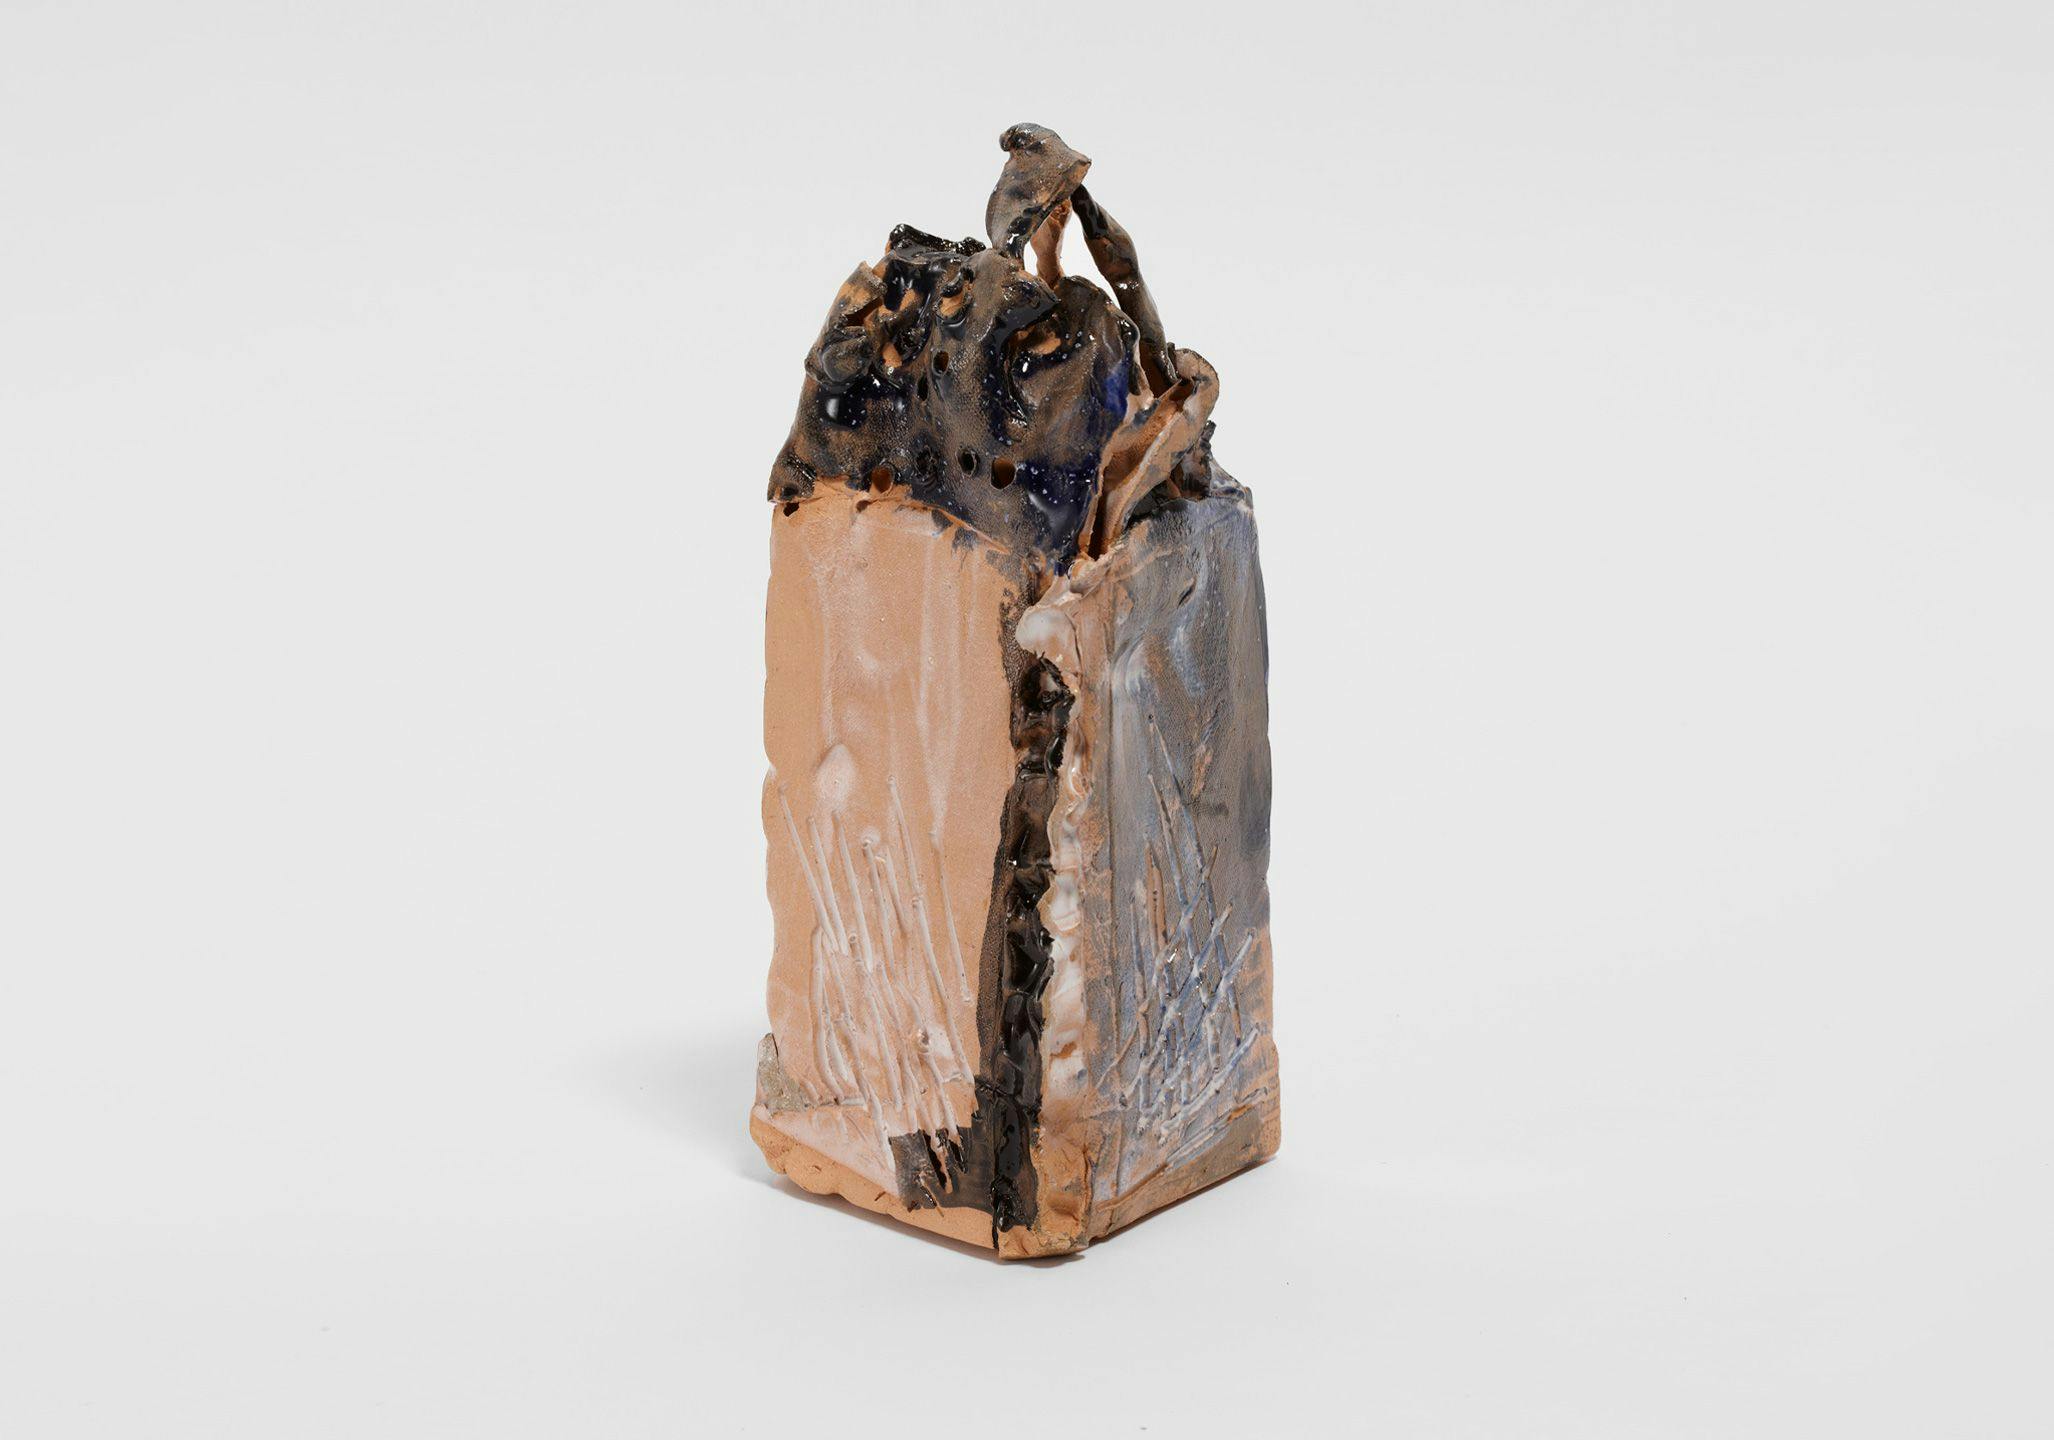 An untitled ceramic sculpture by Josh Smith, dated 2013.